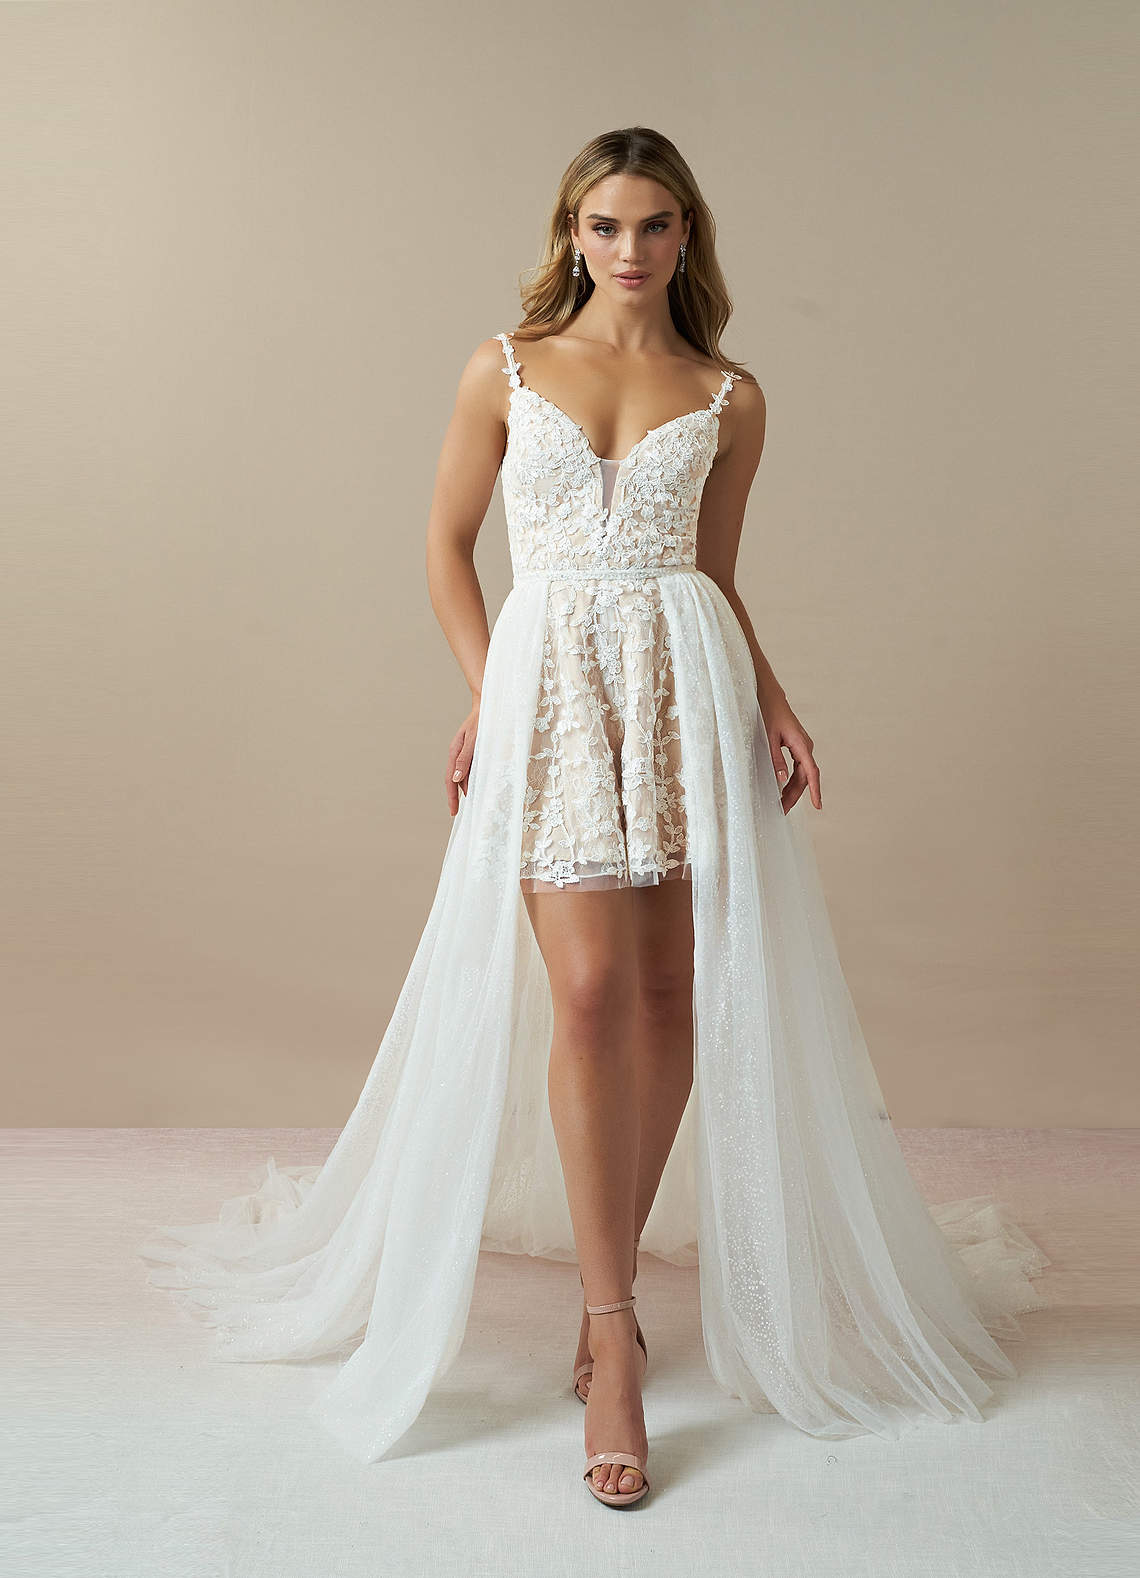 Small Size, Wedding dresses, Size: chest 34 waist 28(adjustable), A-line 